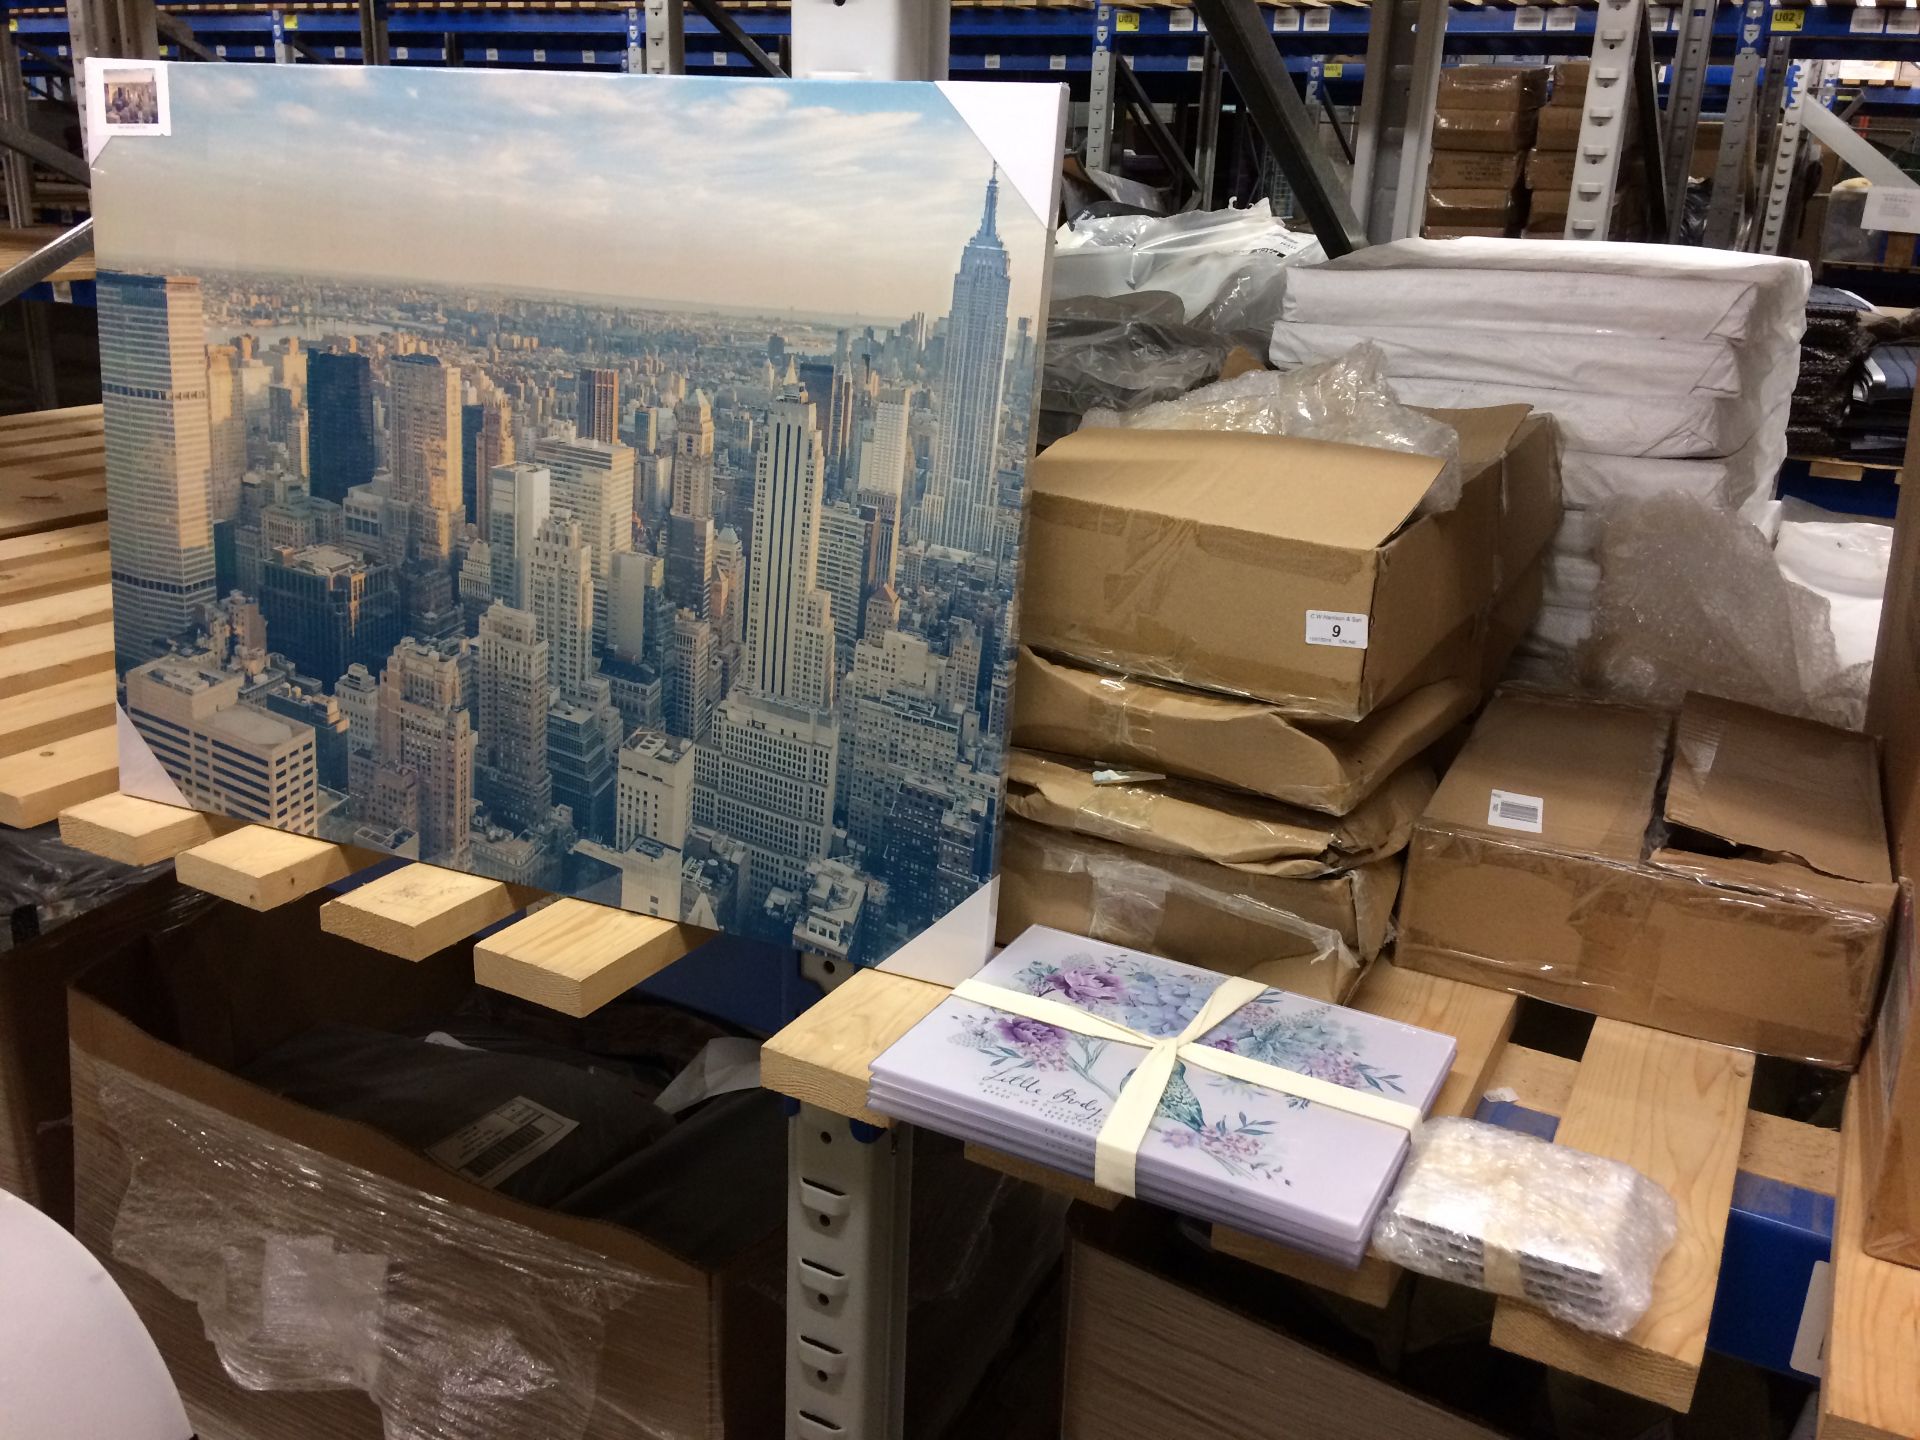 Contents to part of rack - New York day canvas prints 57 x 77cm, lady bird place mats, coasters,